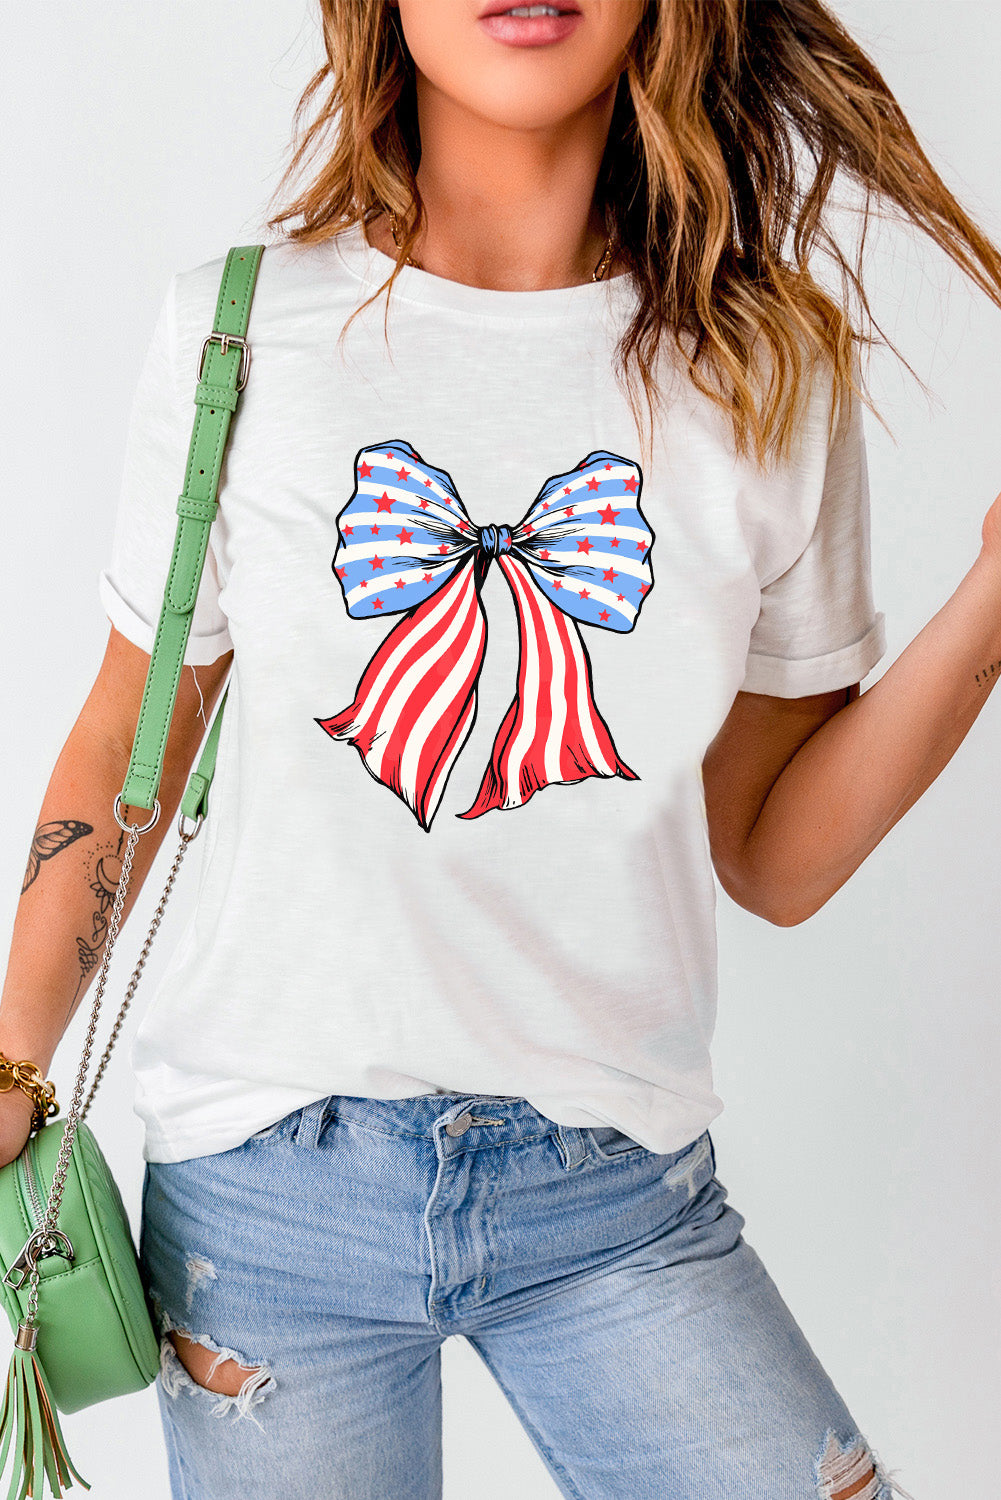 Get the White Stripes & Stars Bowknot T-Shirt for a patriotic touch to your casual style. Perfect for holidays and everyday wear!